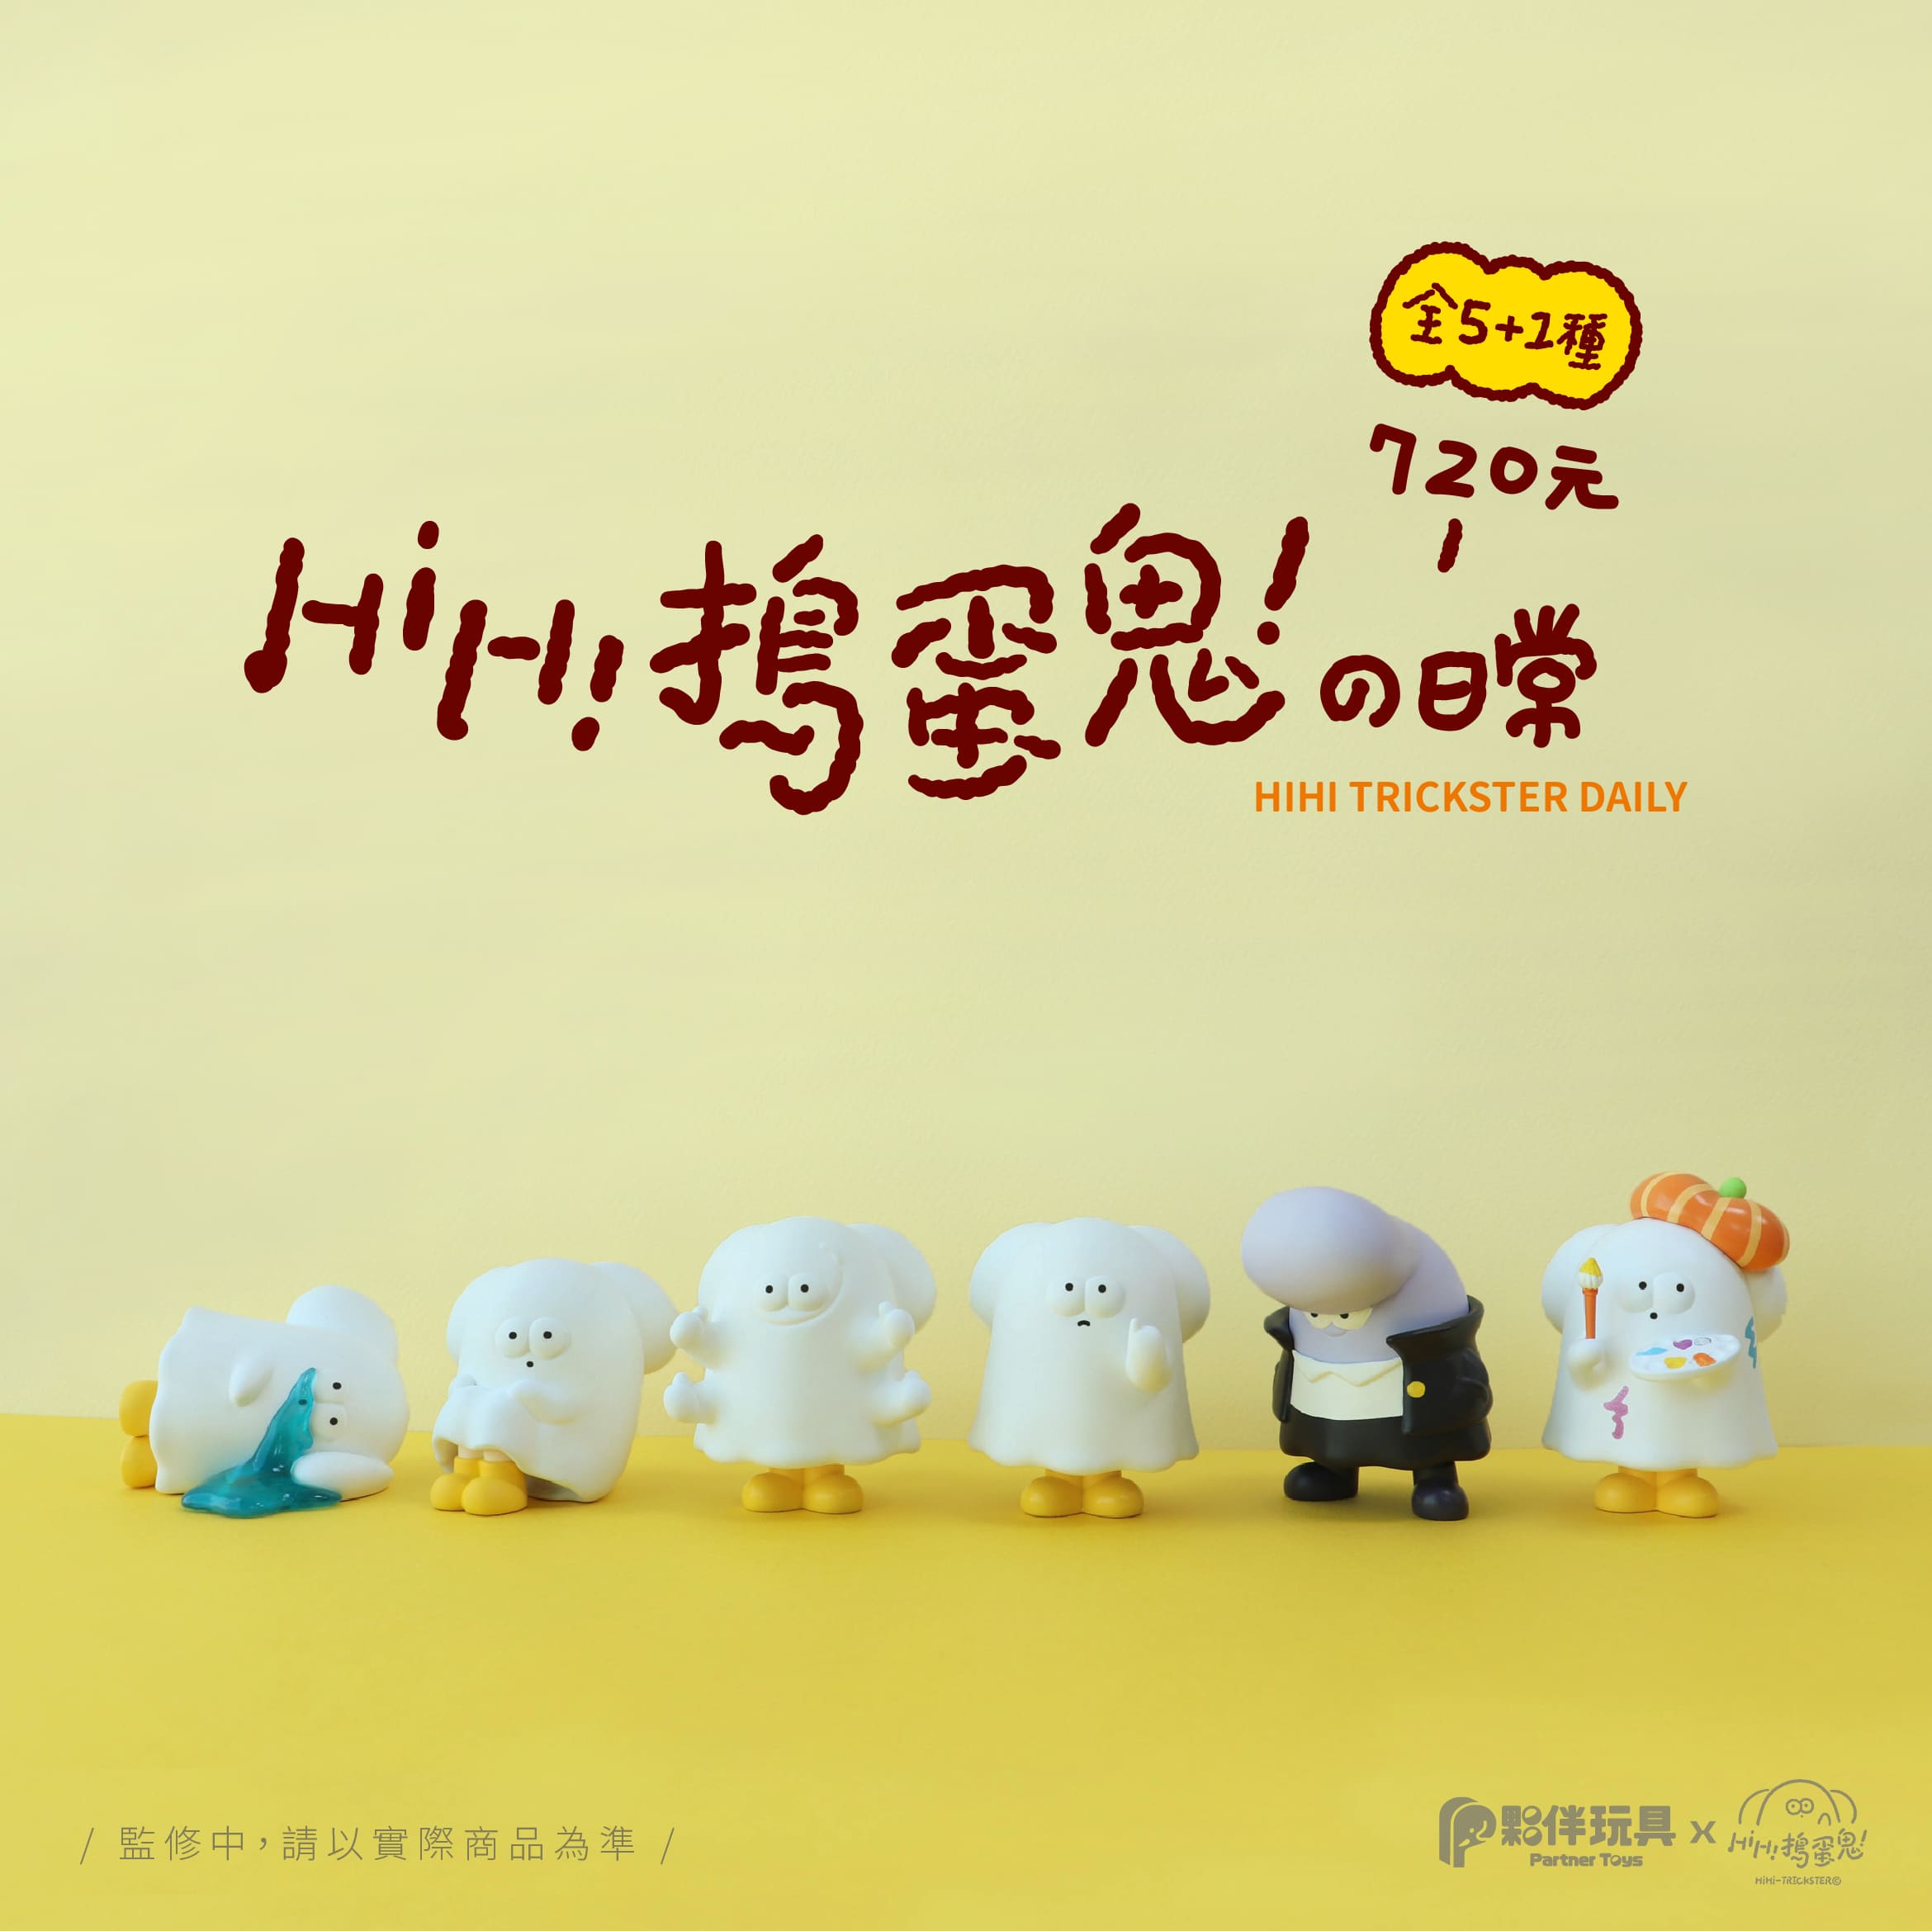 HIHI TRICKSTER DAILY Blind Box Series toy figurines with various expressions and accessories.